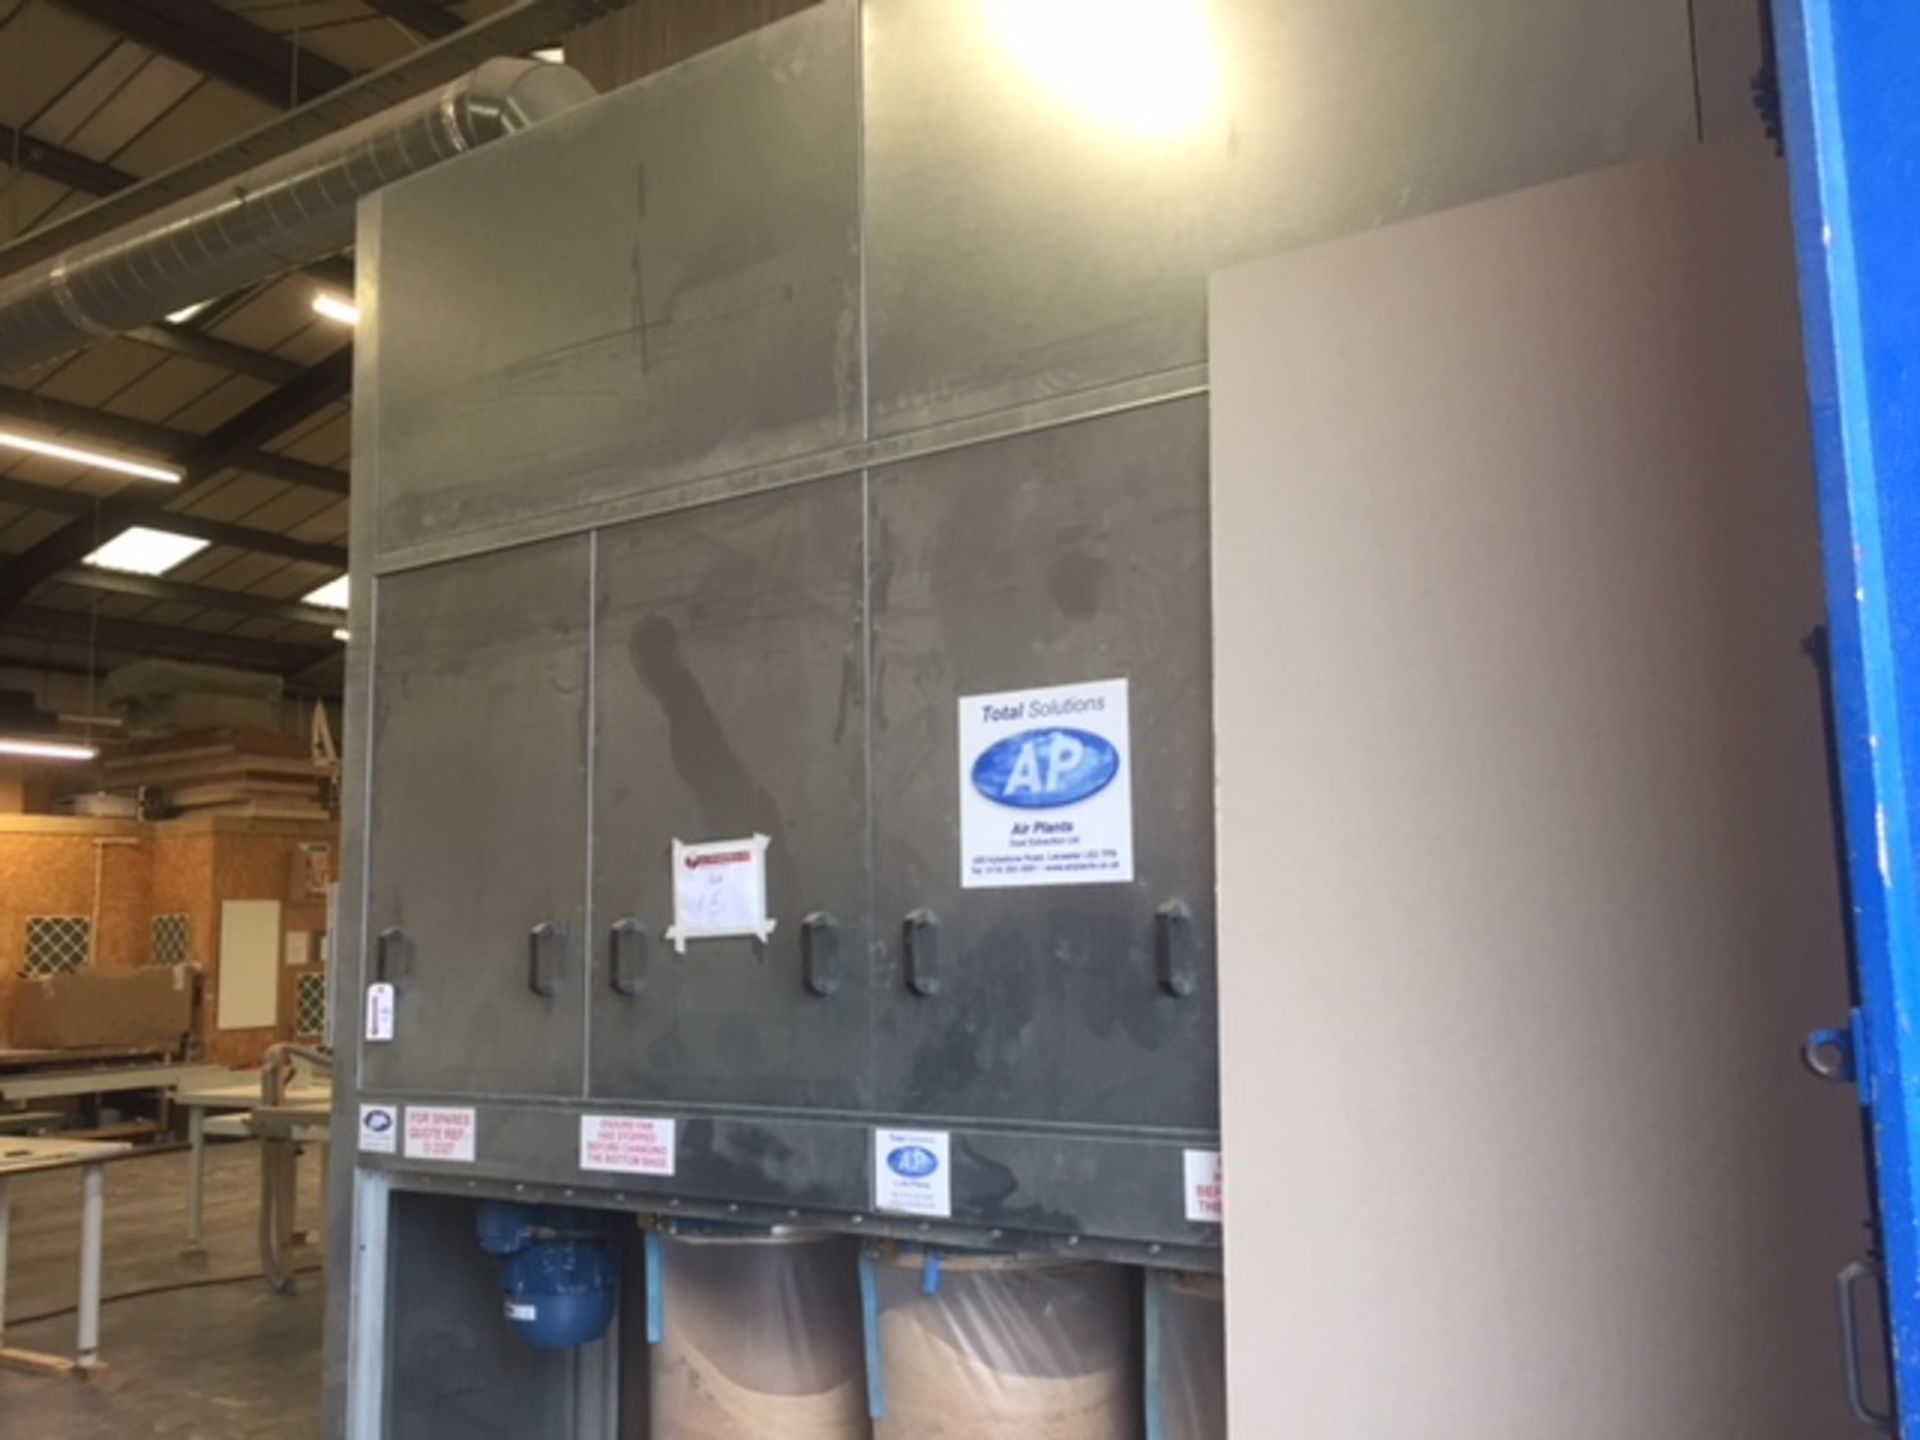 Total Solutions Air Plants, 4 Bag Dust Extractor System with Ducting.